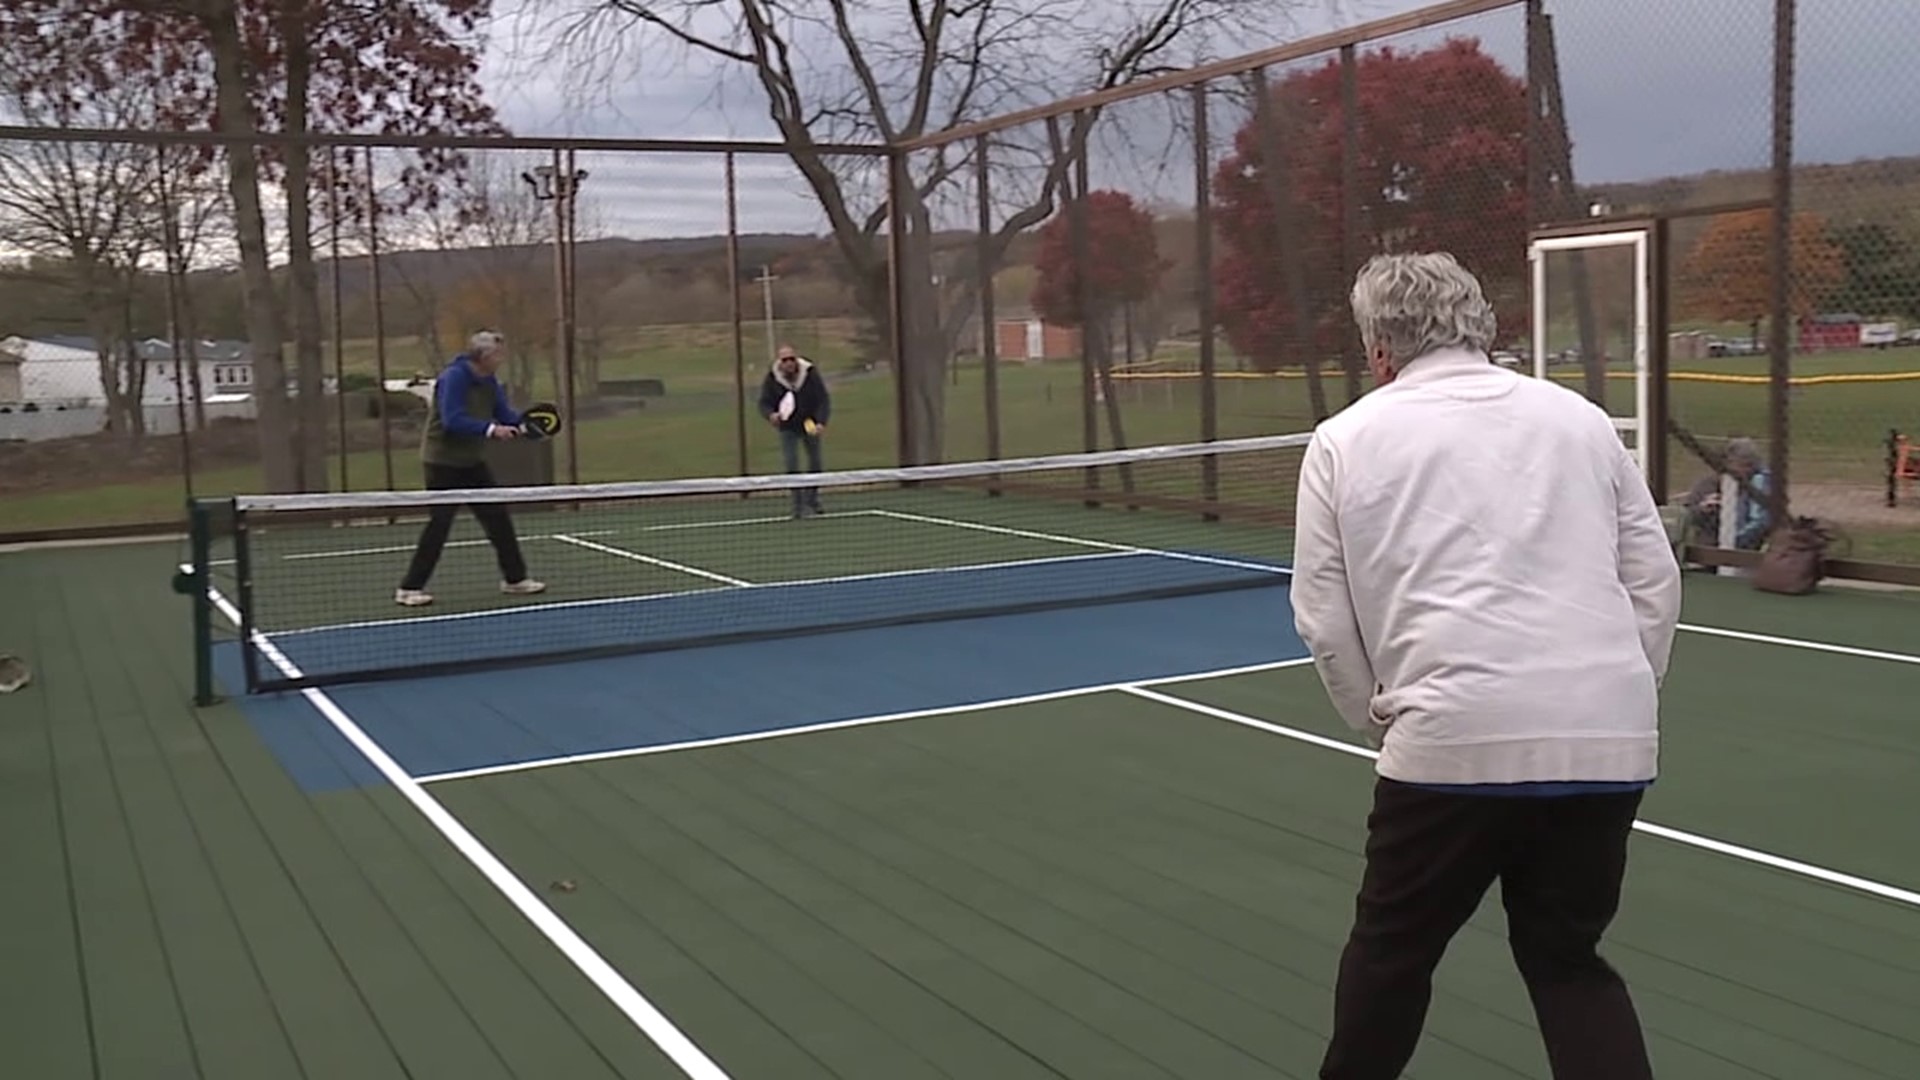 If you're looking for a place to play pickleball, there's a new court to hit at Barney Farms Park.